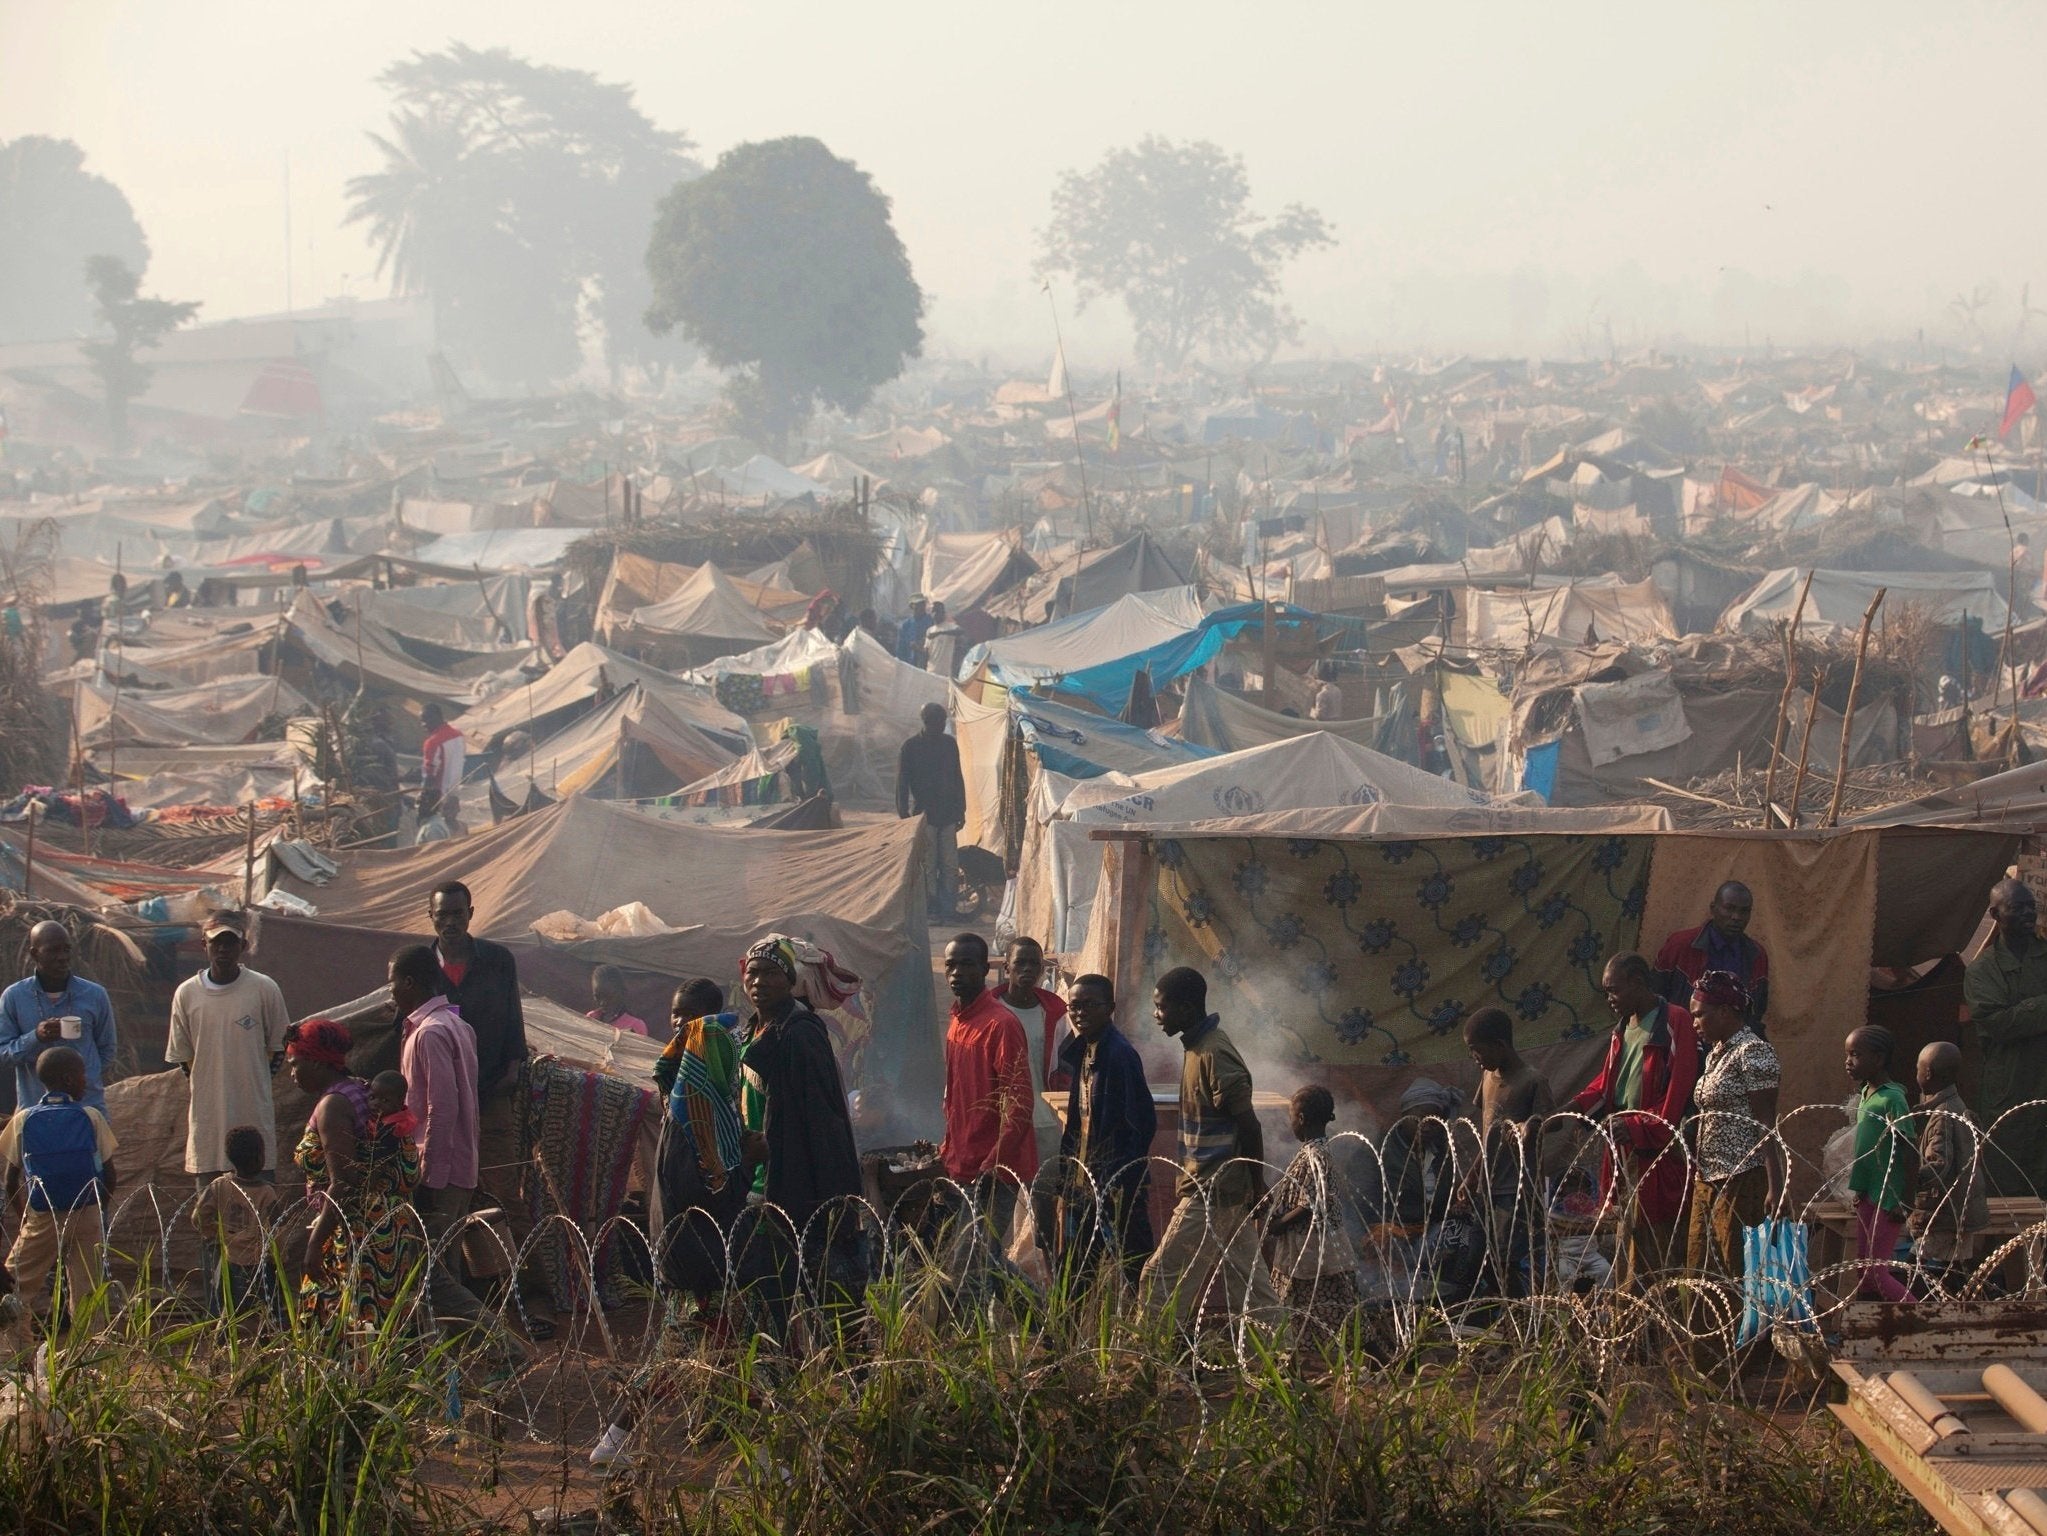 A refugee camp in Bangui, the capital of the Central African Republic